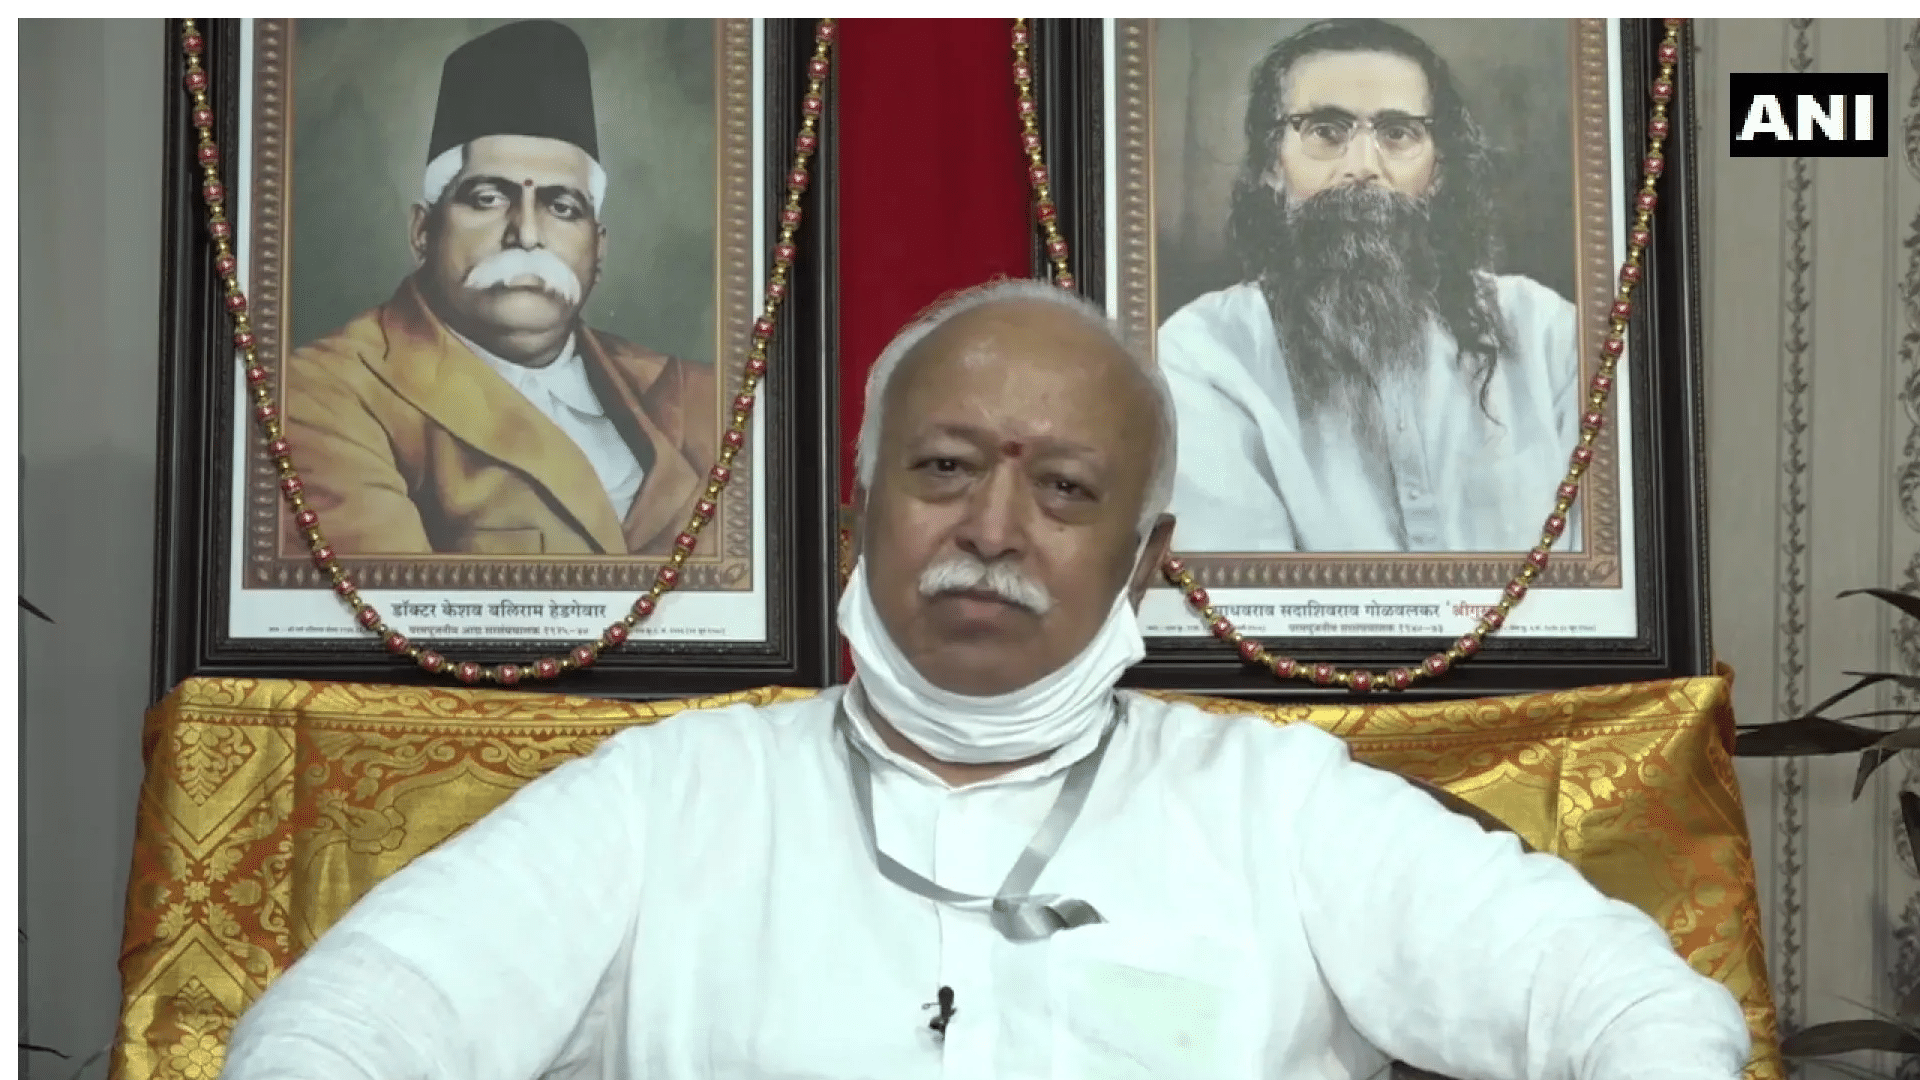 RSS chief Mohan Bhagwat tests positive for COVID-19, hospitalised in Nagpur